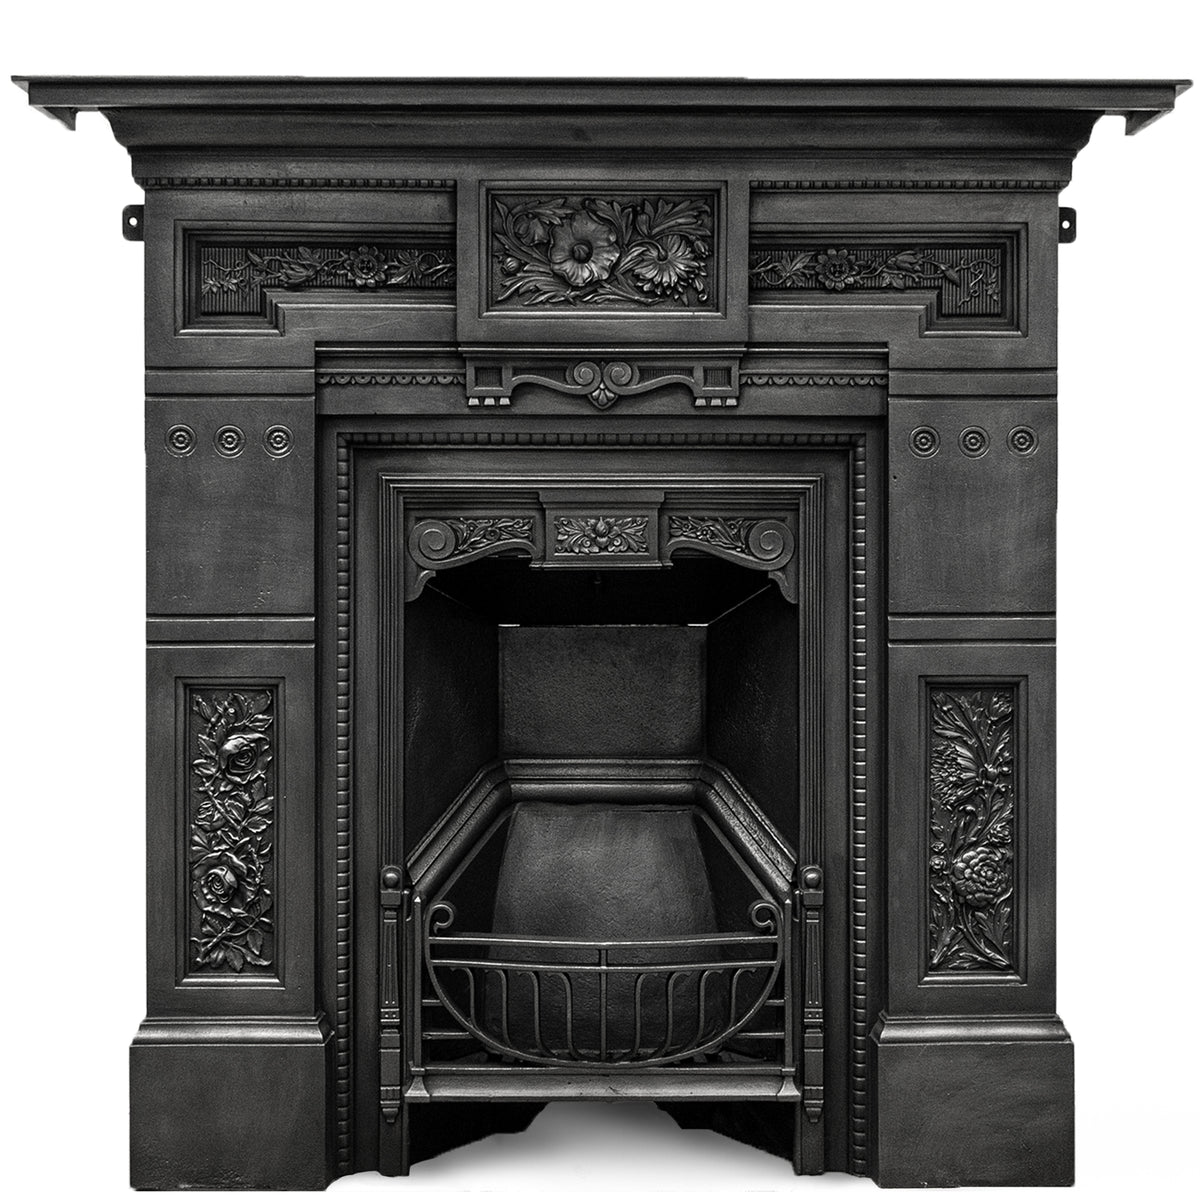 Antique Cast Iron Victorian Combination Fireplace | The Architectural Forum